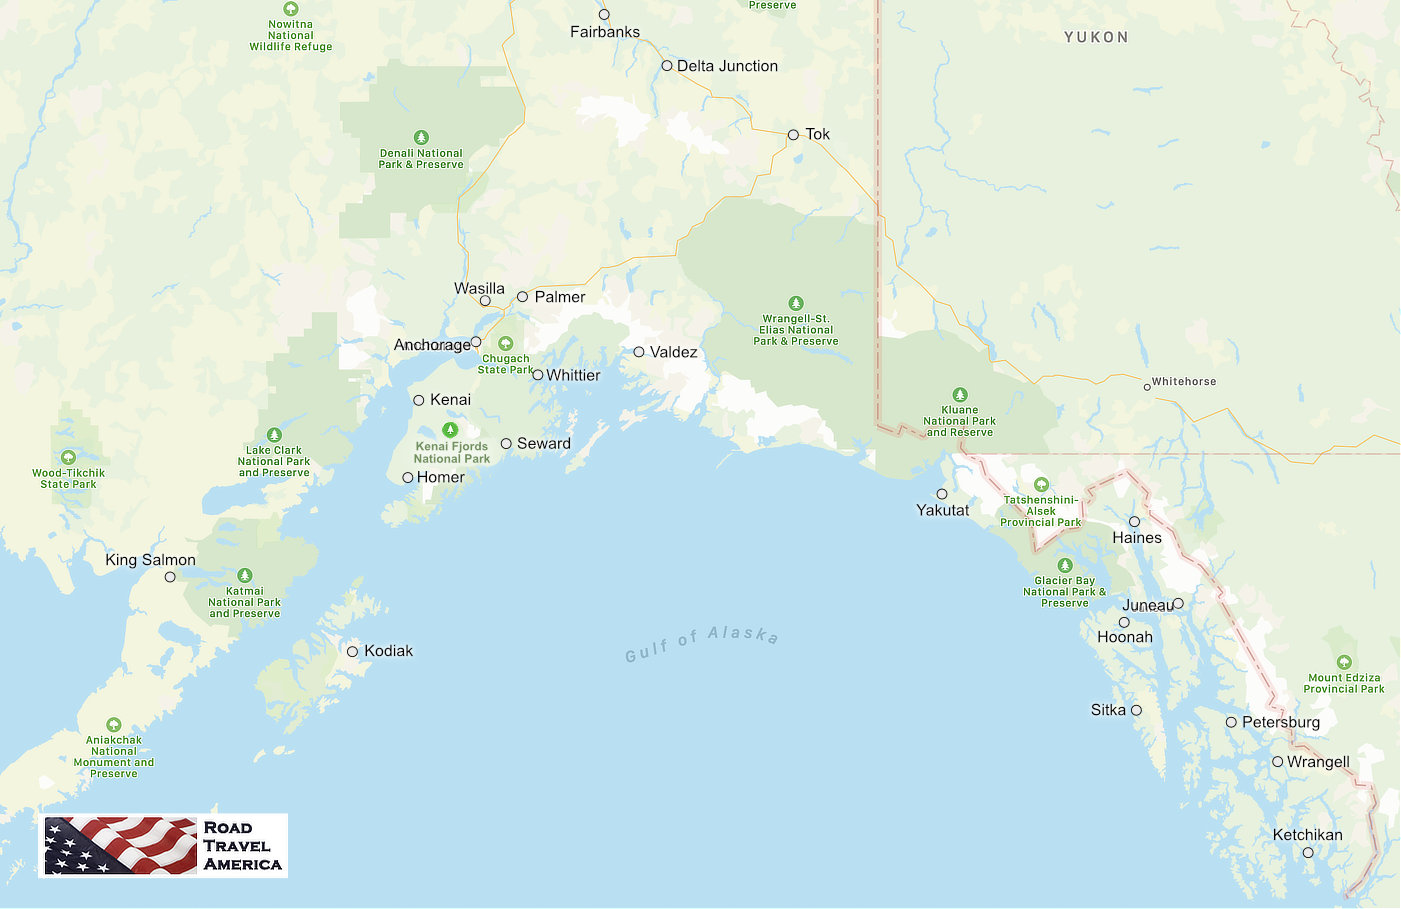 Map showing the locations of major cities, travel destinations and national parks in Alaska